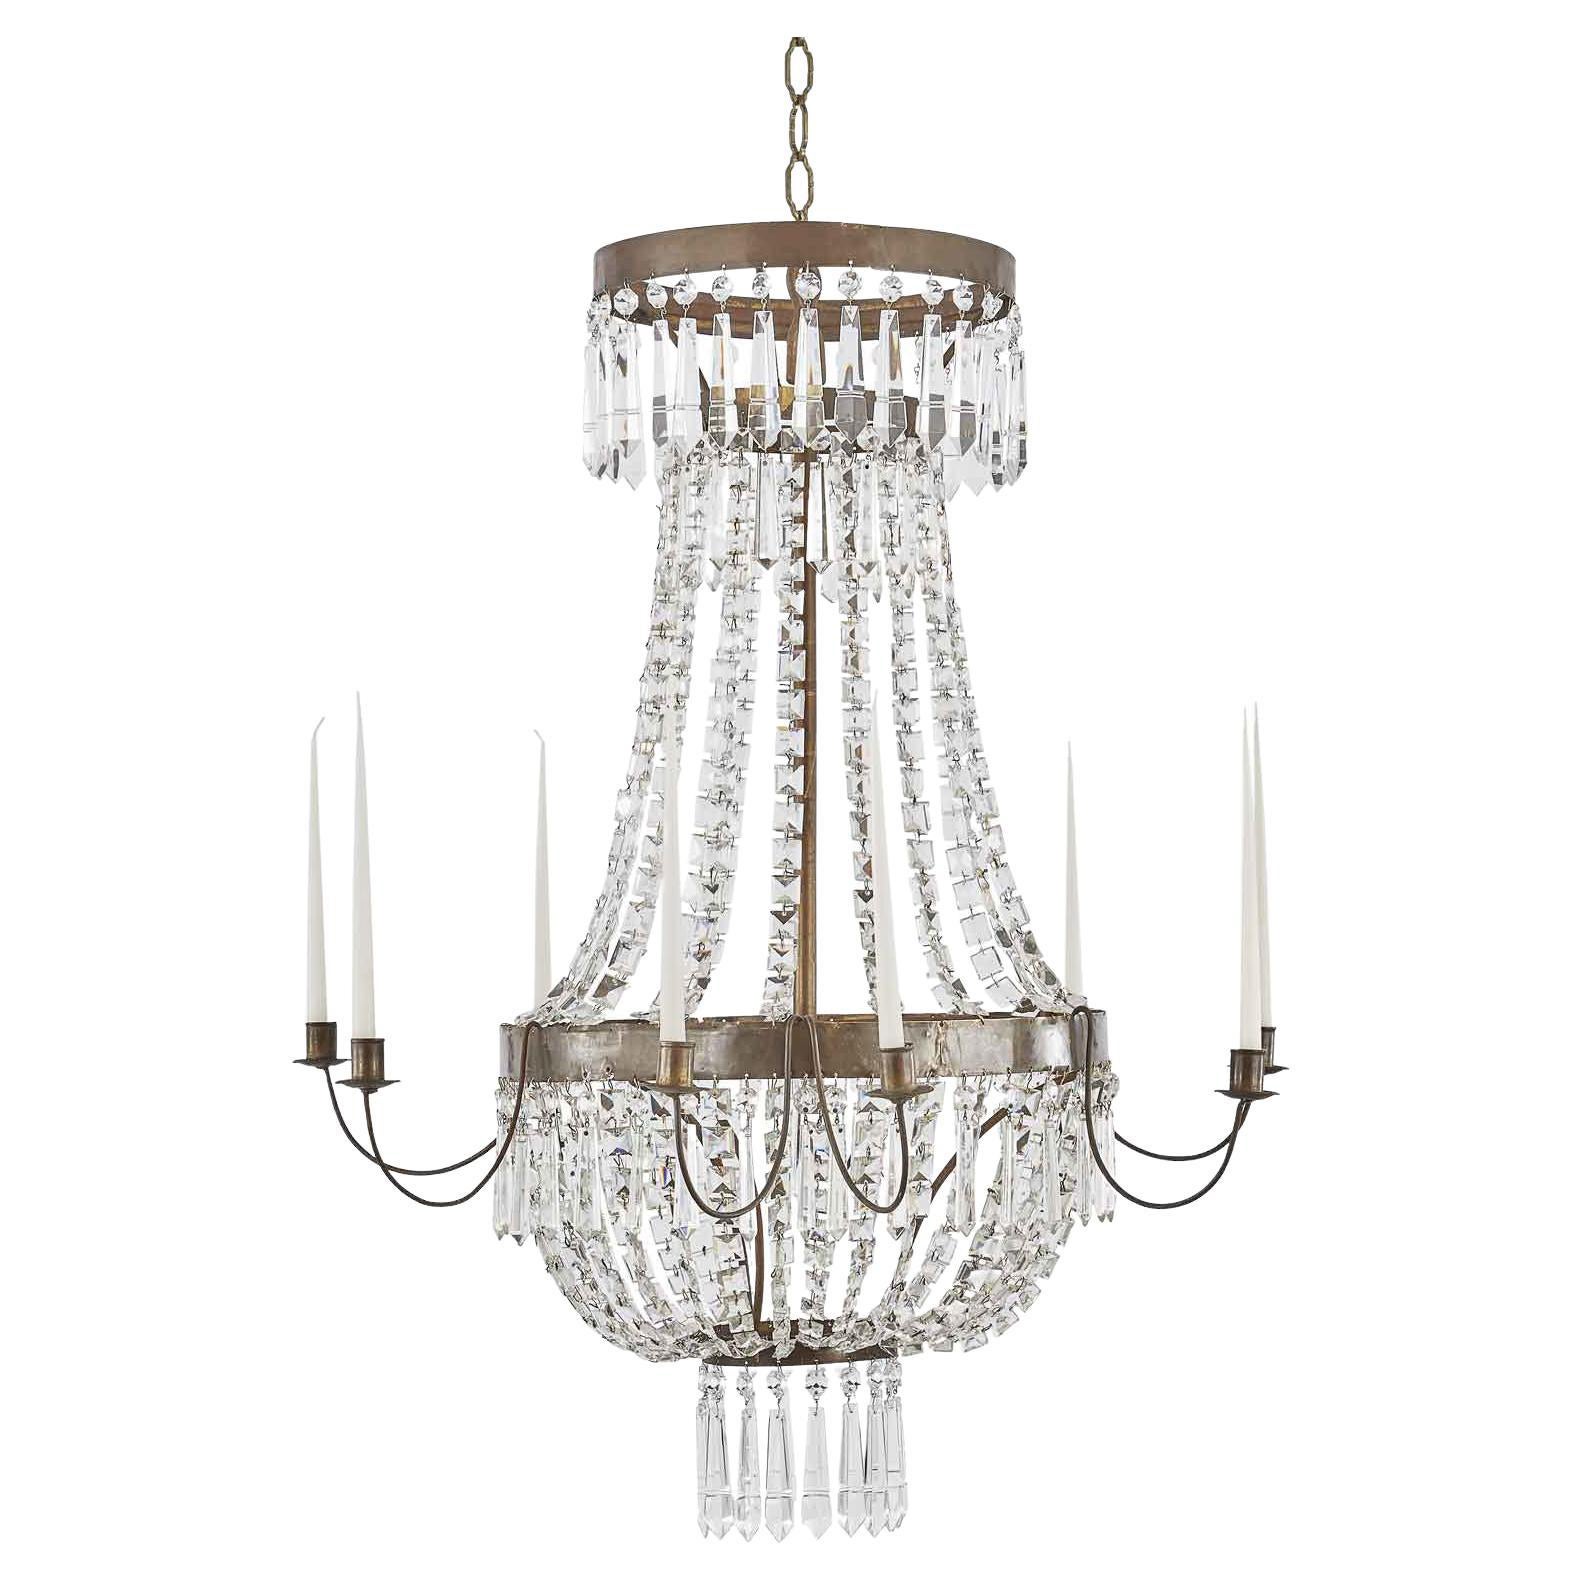 19th Century Italian Empire Crystal Candle Chandelier For Sale